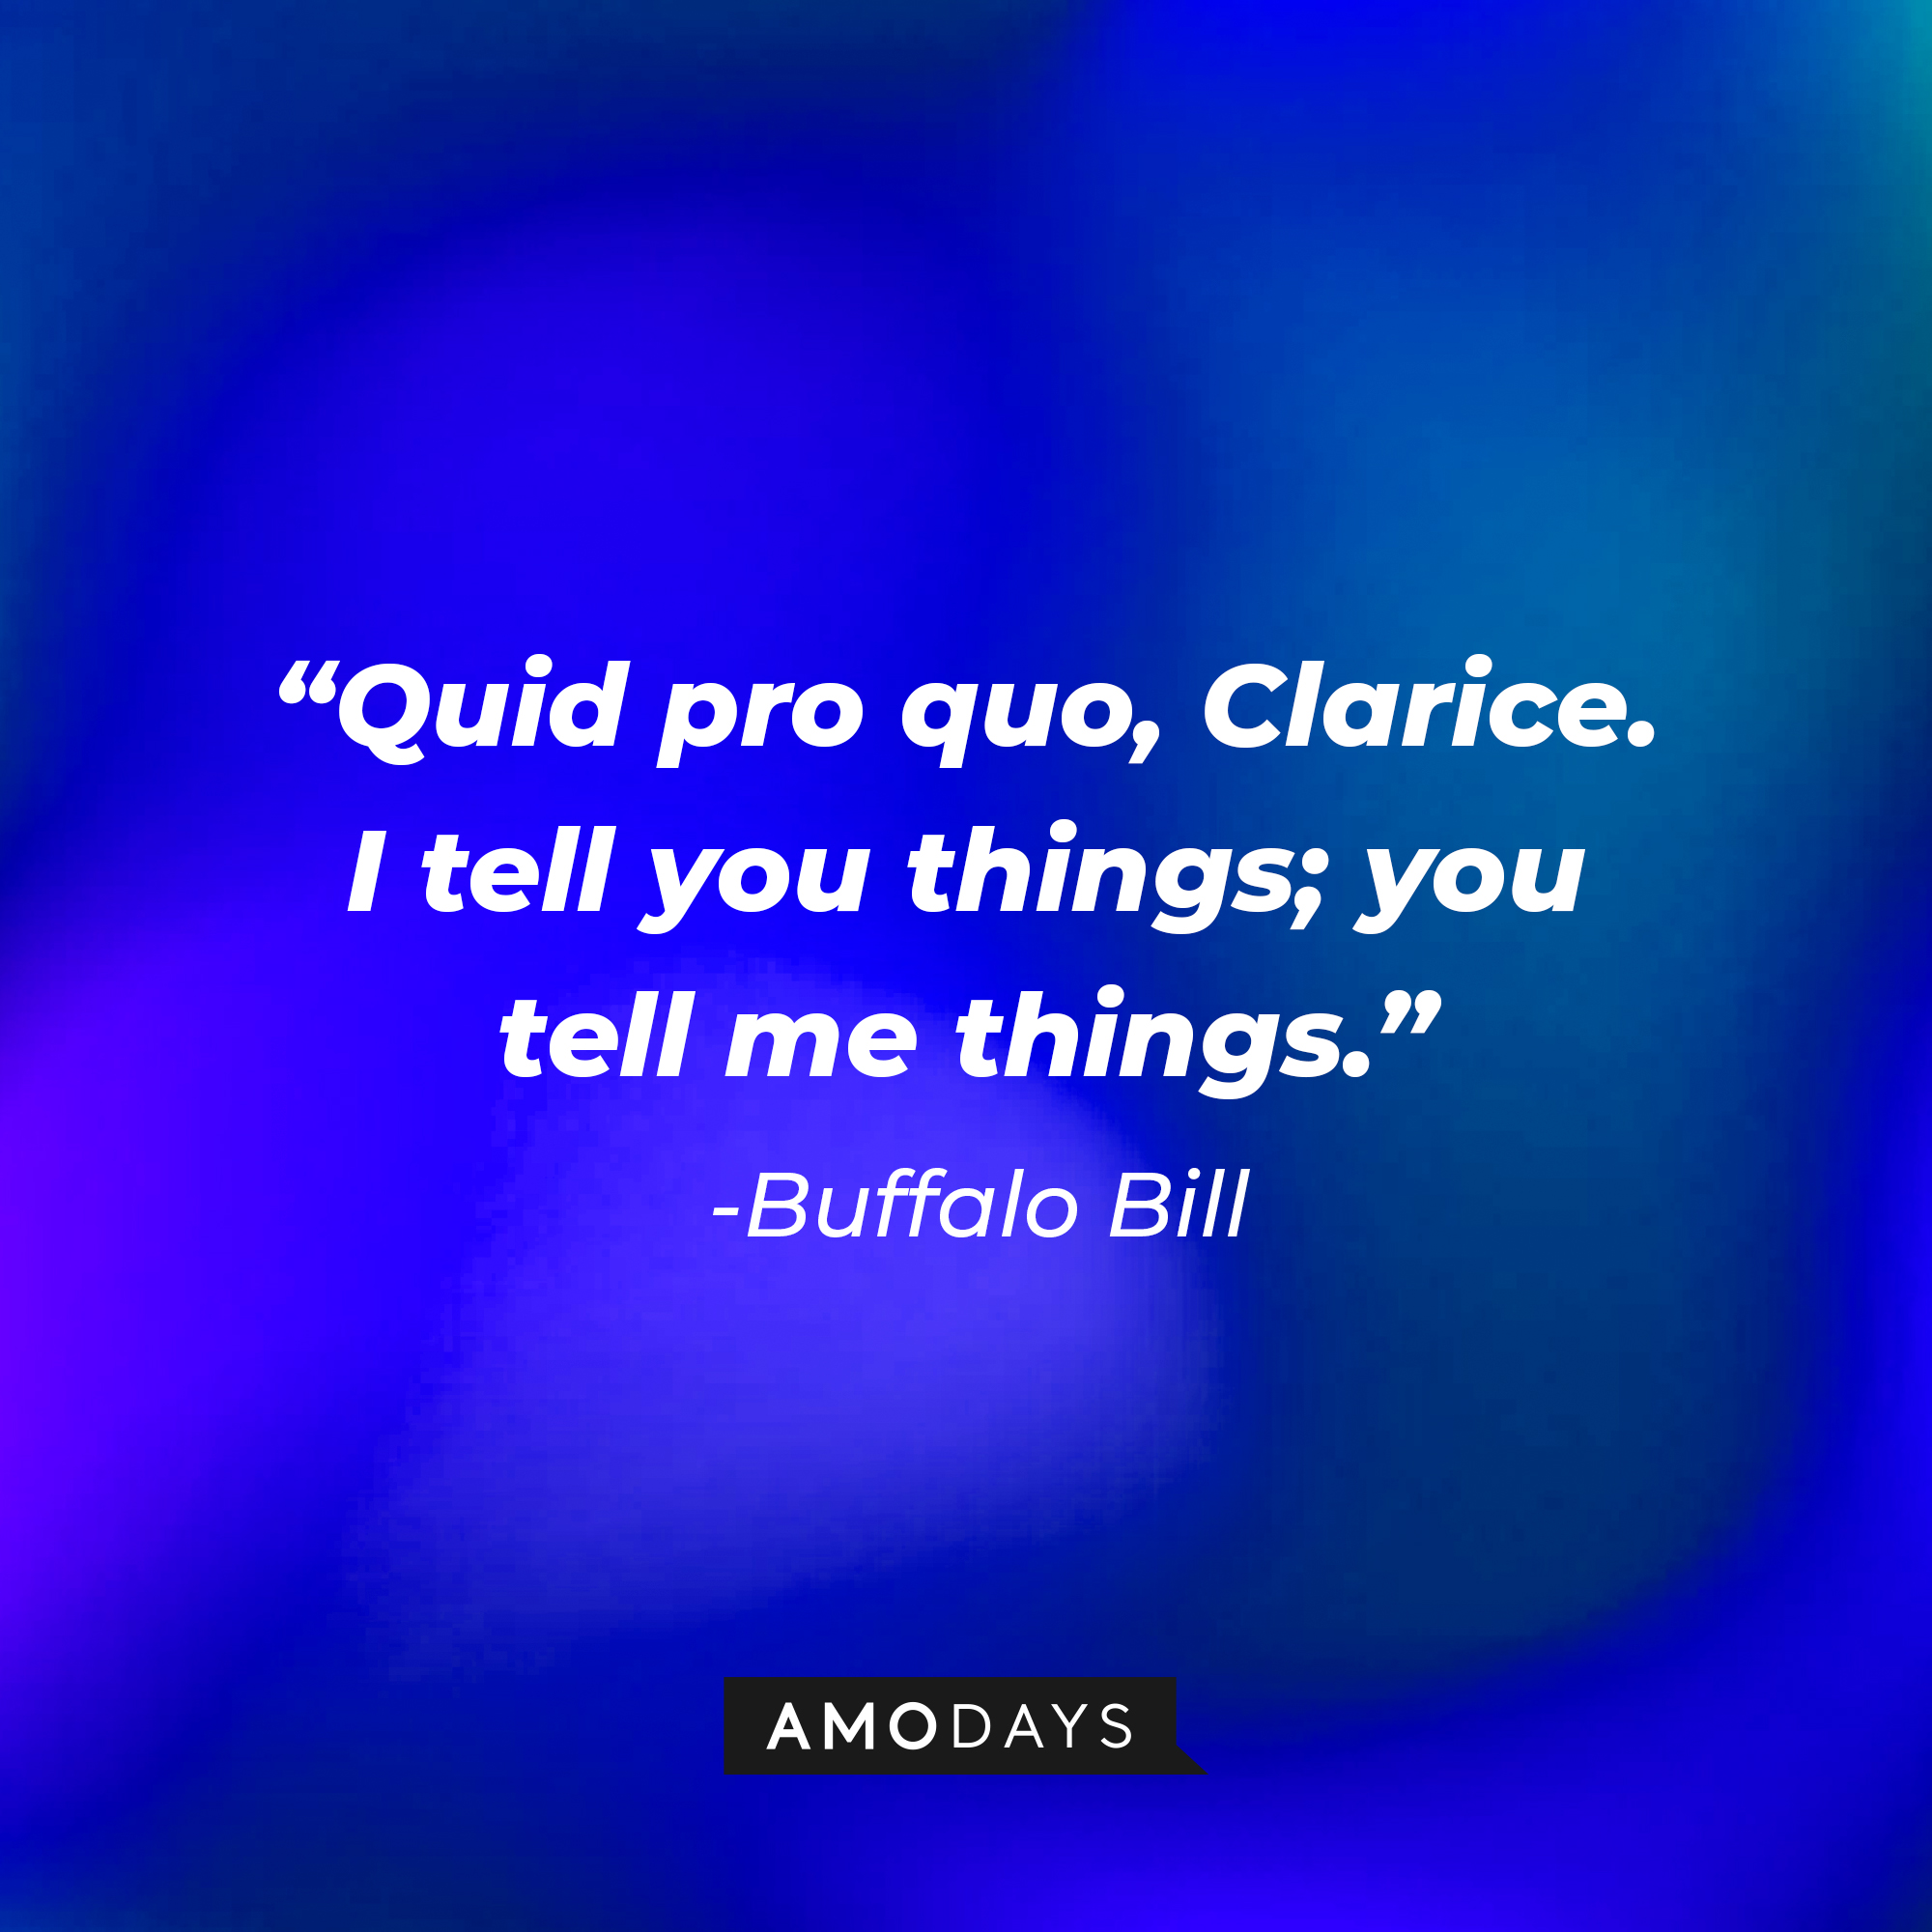 Buffalo Bill's quote from "The Silence of the Lambs:" "Quid pro quo, Clarice. I tell you things; you tell me things." | Source: AmoDays